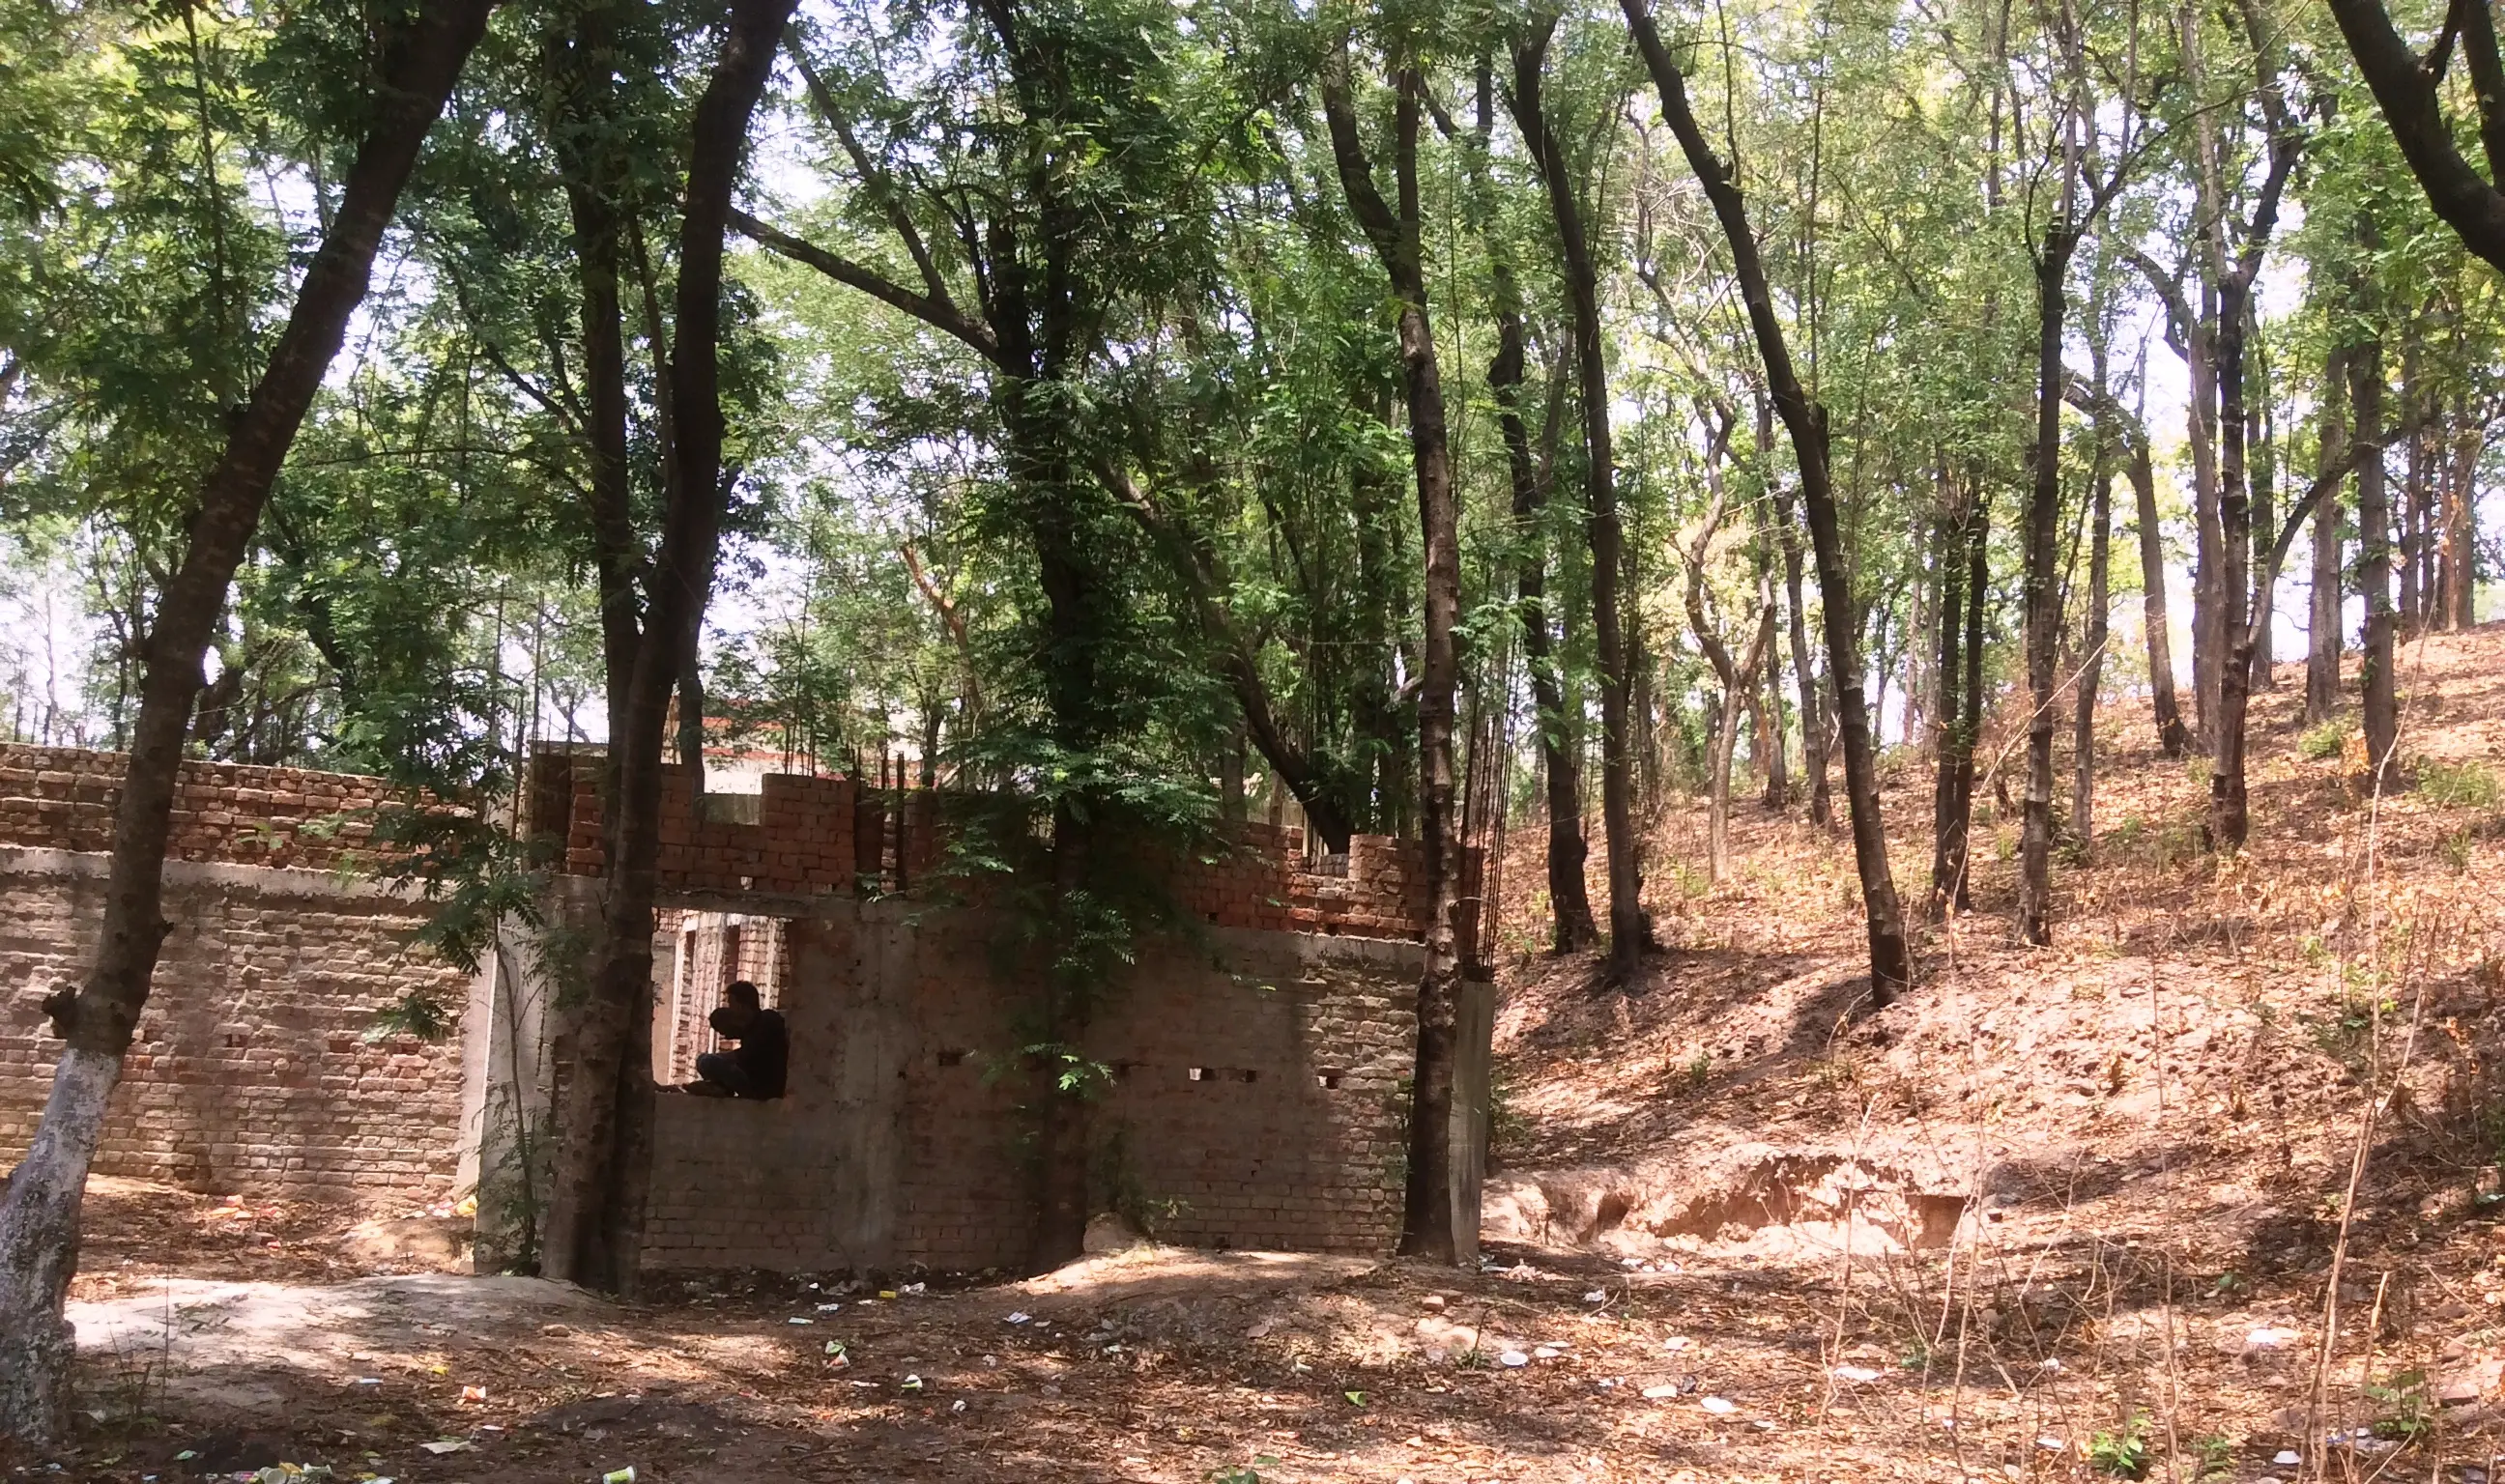 A semi-constructed building near the grove that will become sacred site 